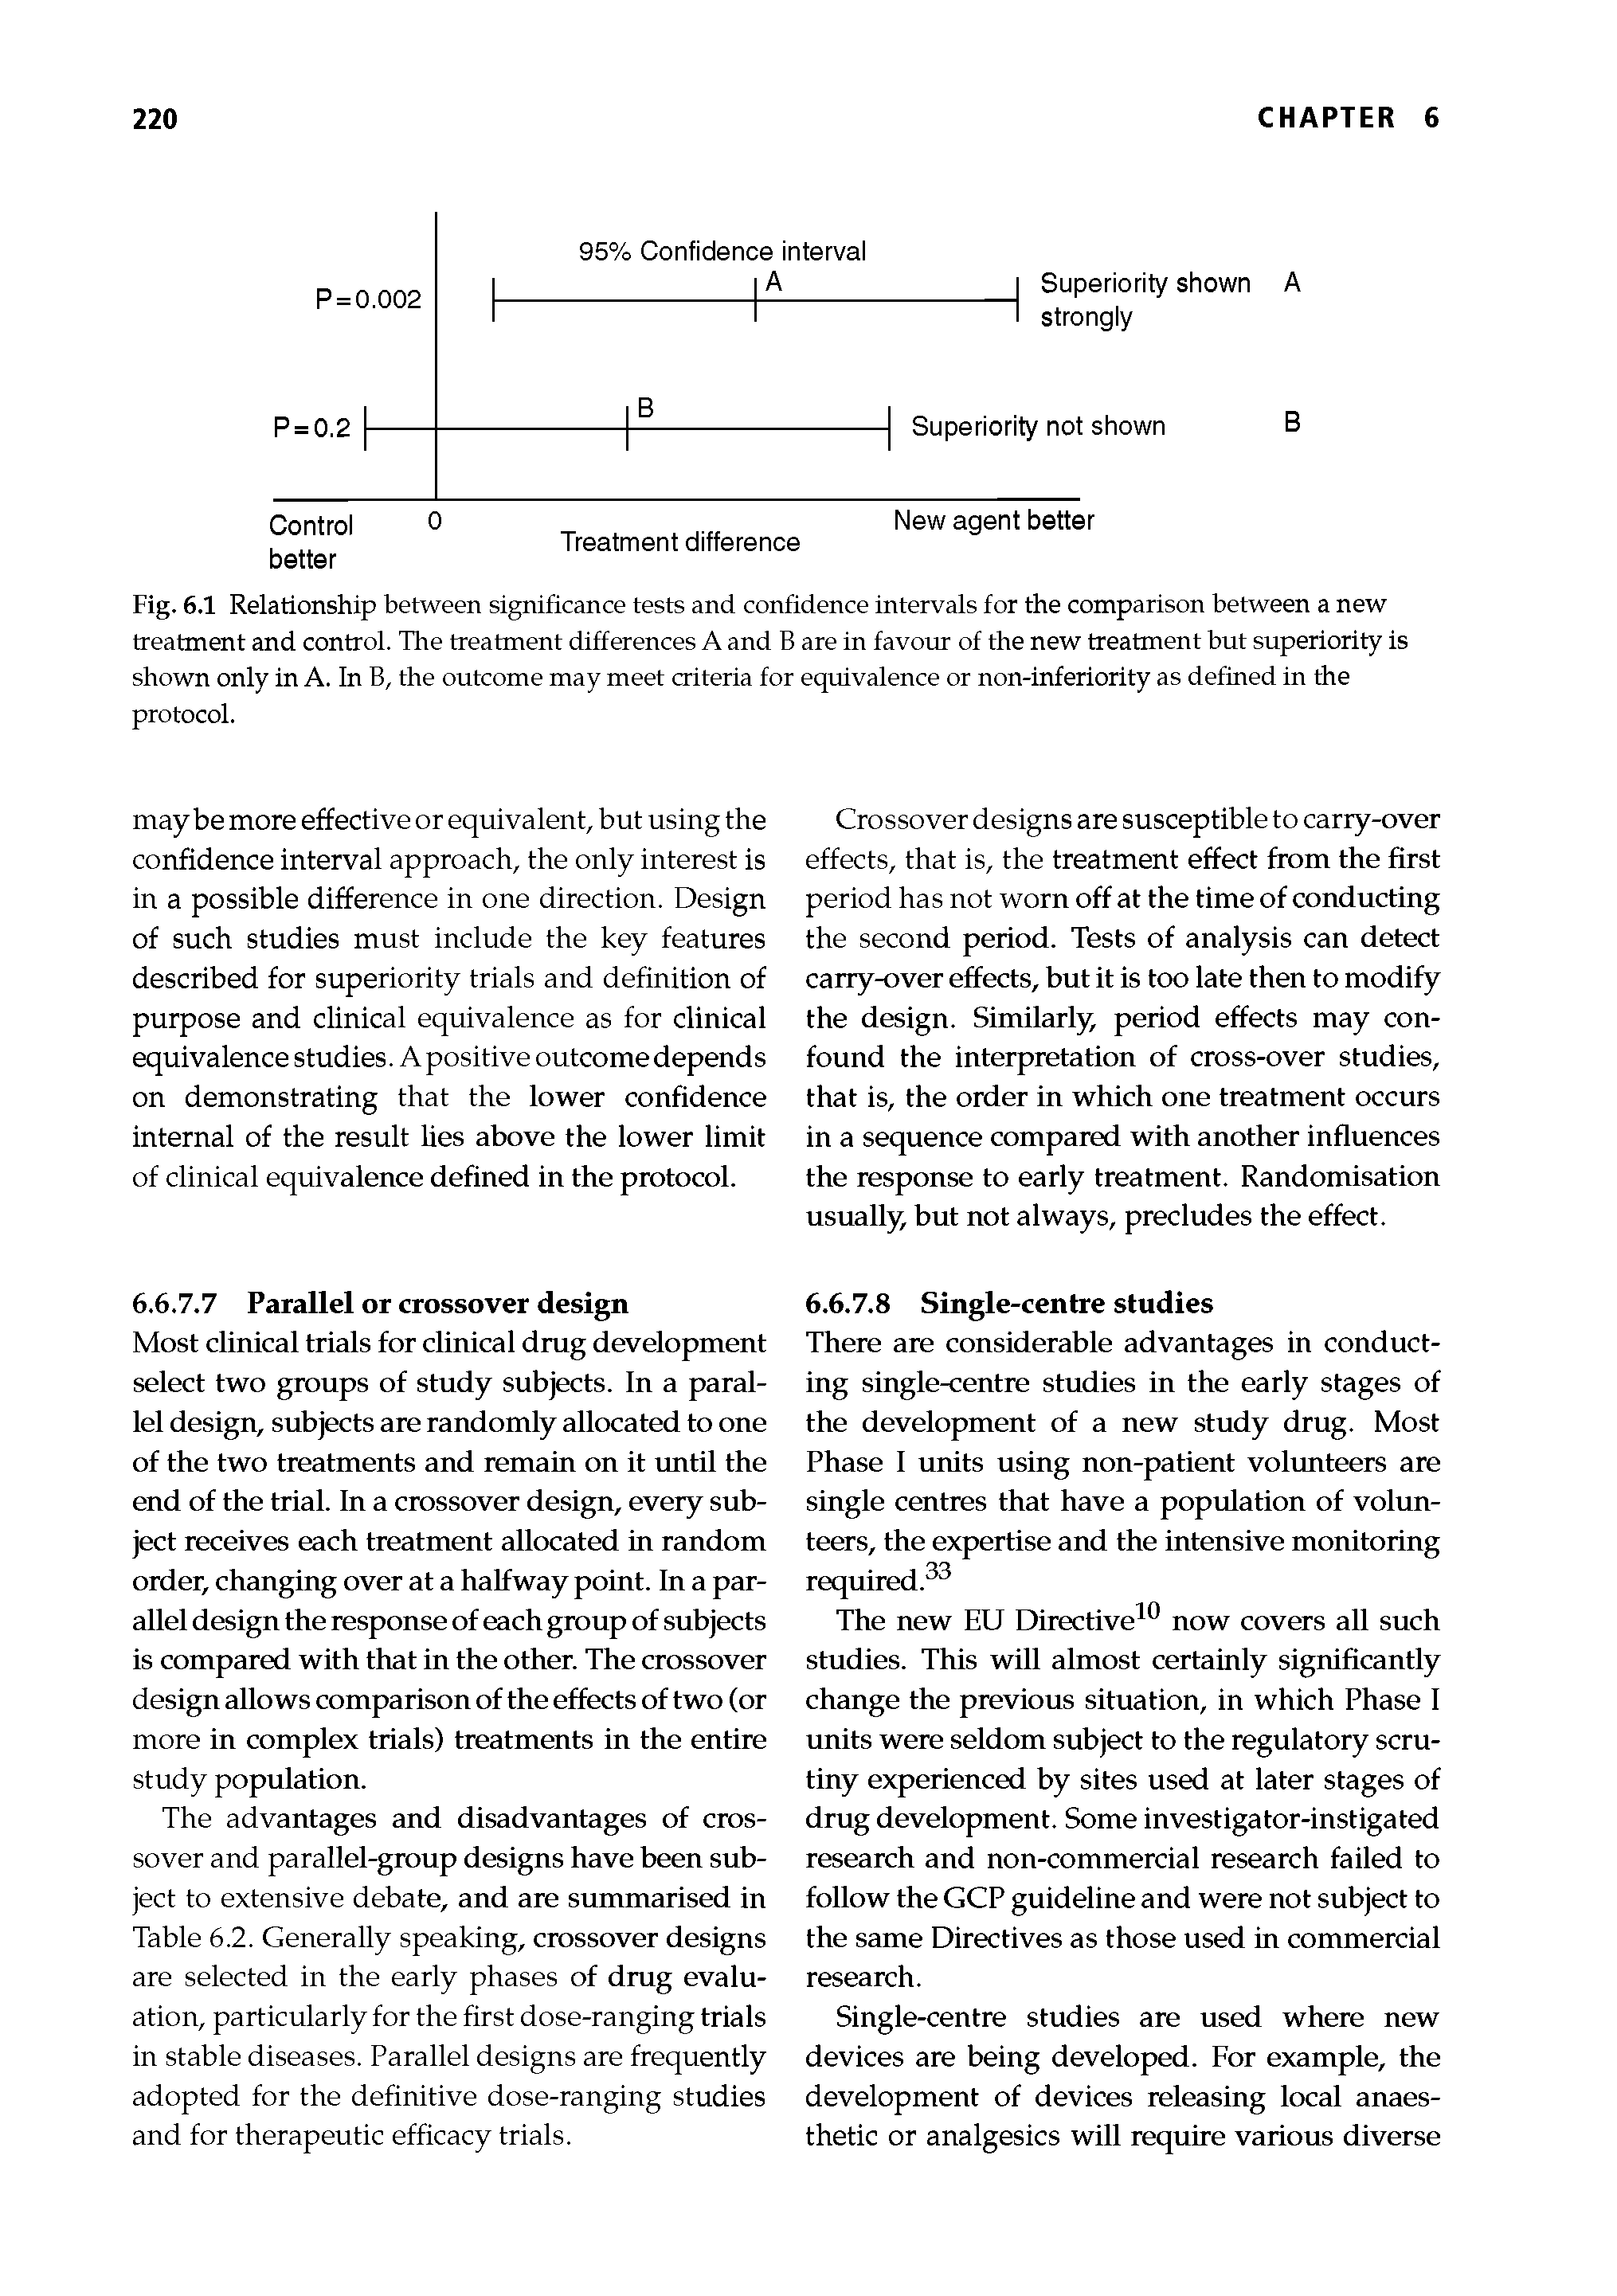 Fig. 6.1 Relationship between significance tests and confidence intervals for the comparison between a new treatment and control. The treatment differences A and B are in favour of the new treatment but superiority is shown only in A. in B, the outcome may meet criteria for equivalence or non-inferiority as defined in the protocol.